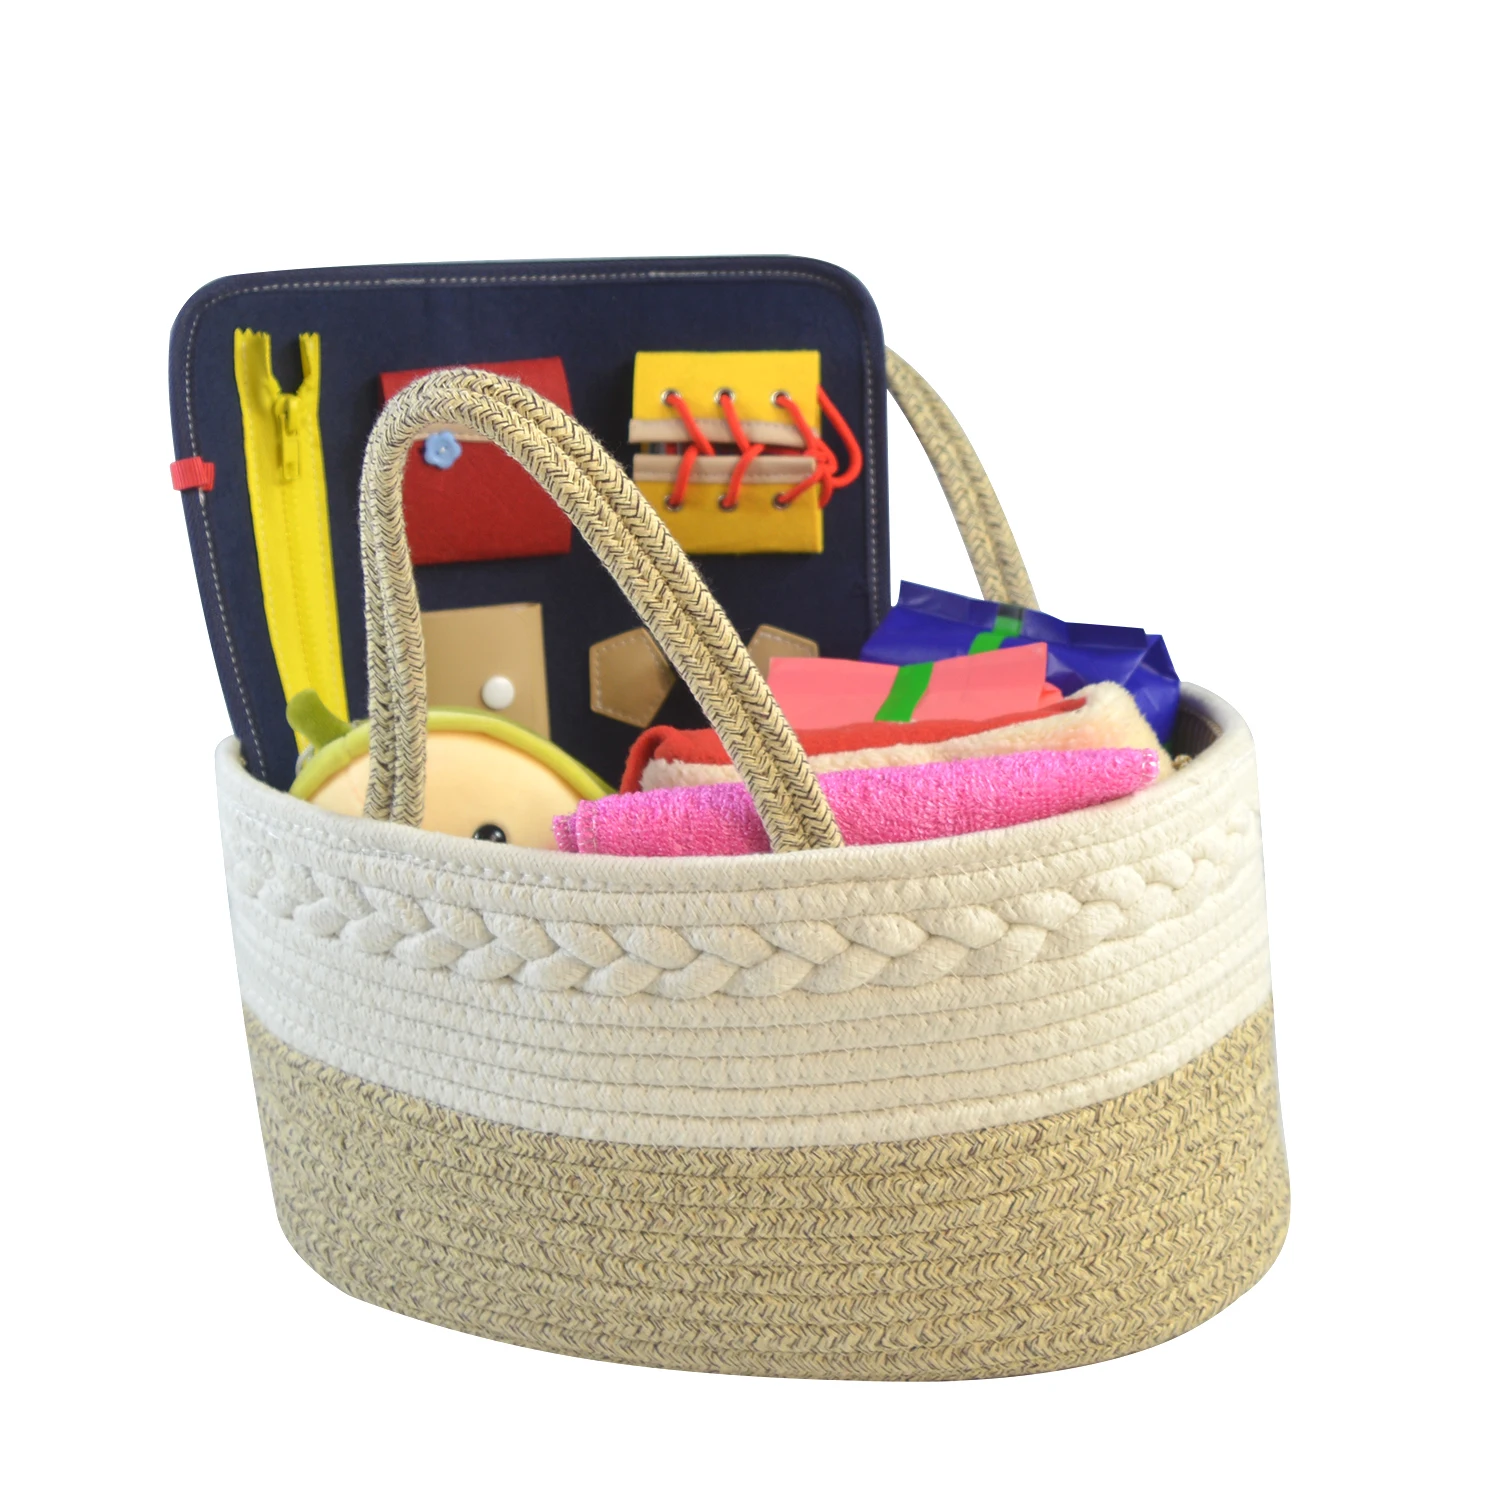 Woven Rope Baby Diaper Caddy Organizer Portable Cotton Rope Diaper Bag With Divider For Changing Table And Car With Toy